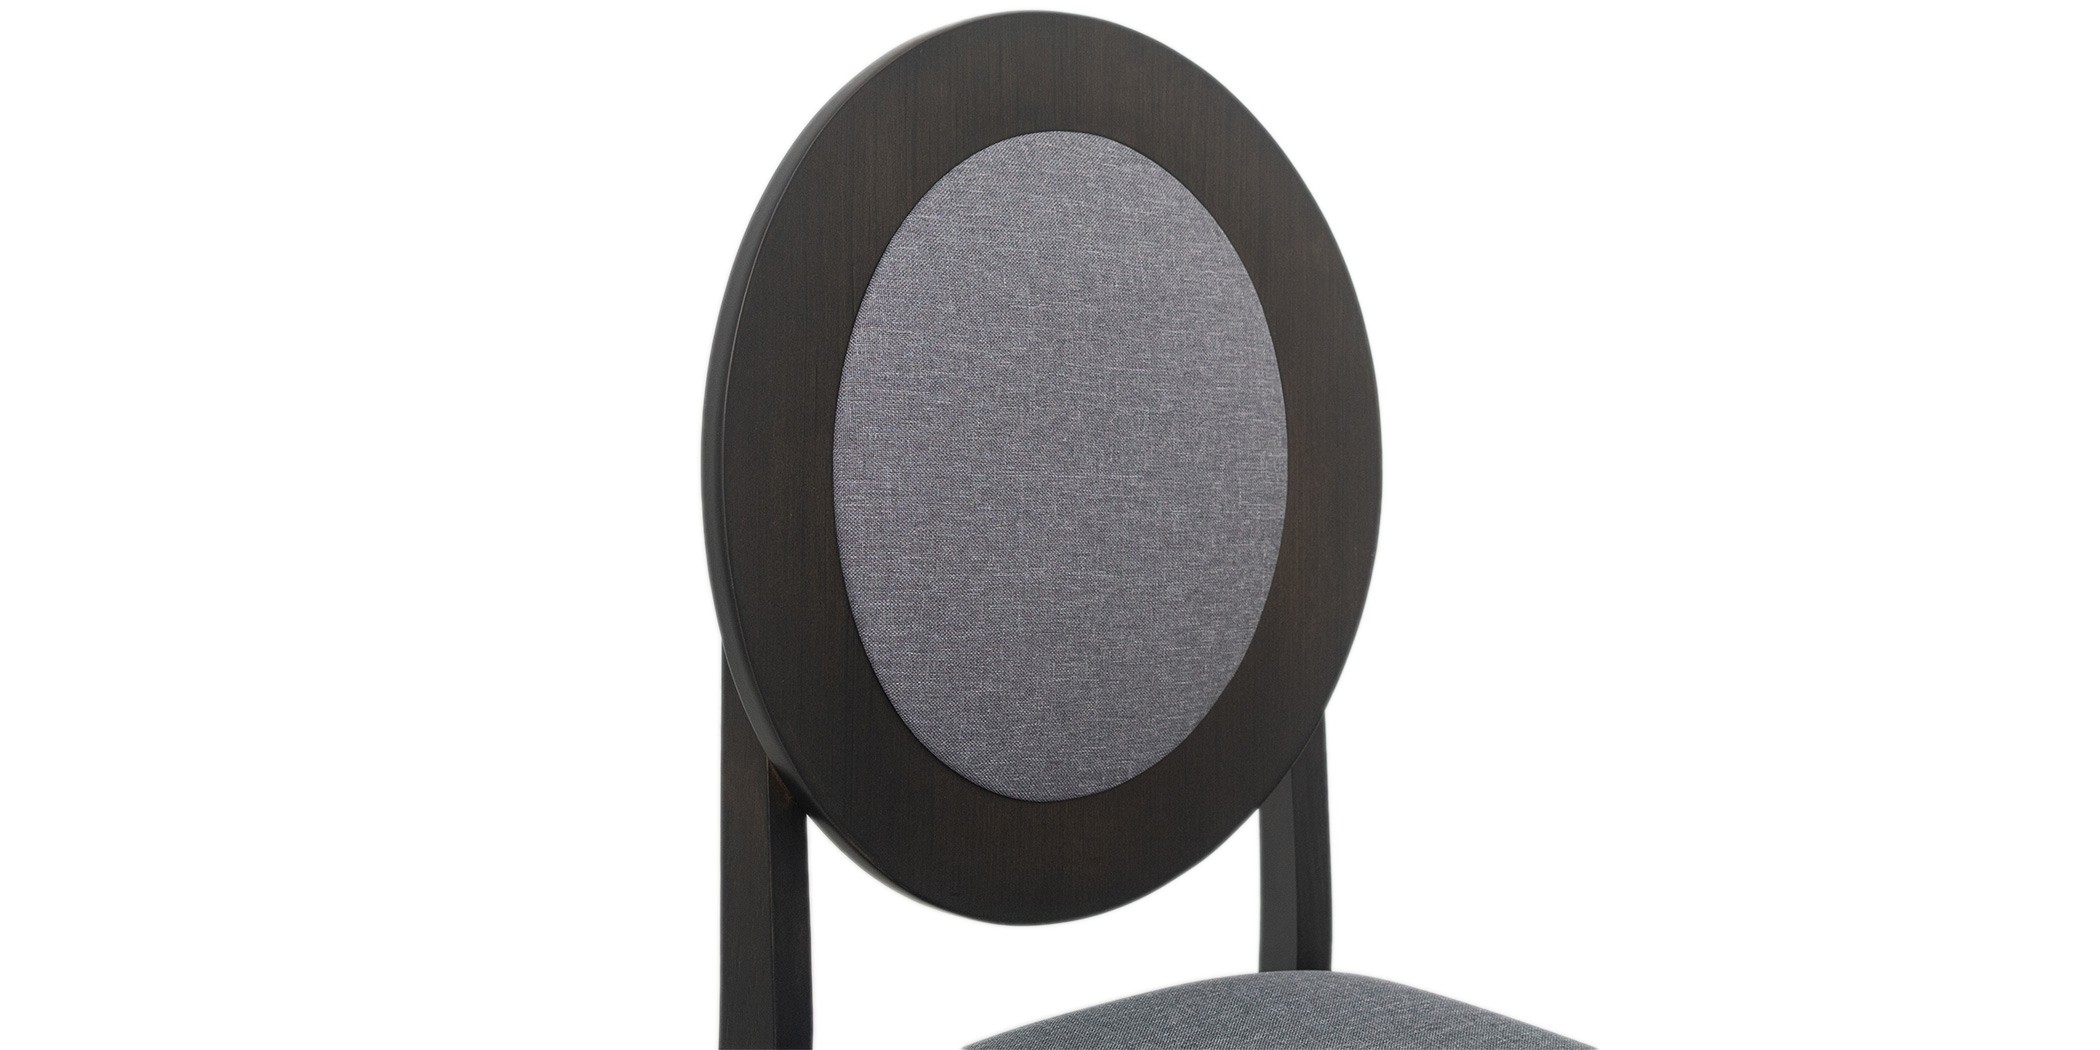 Juvina Table and 6 Chairs Rubberwood Grey Fabric